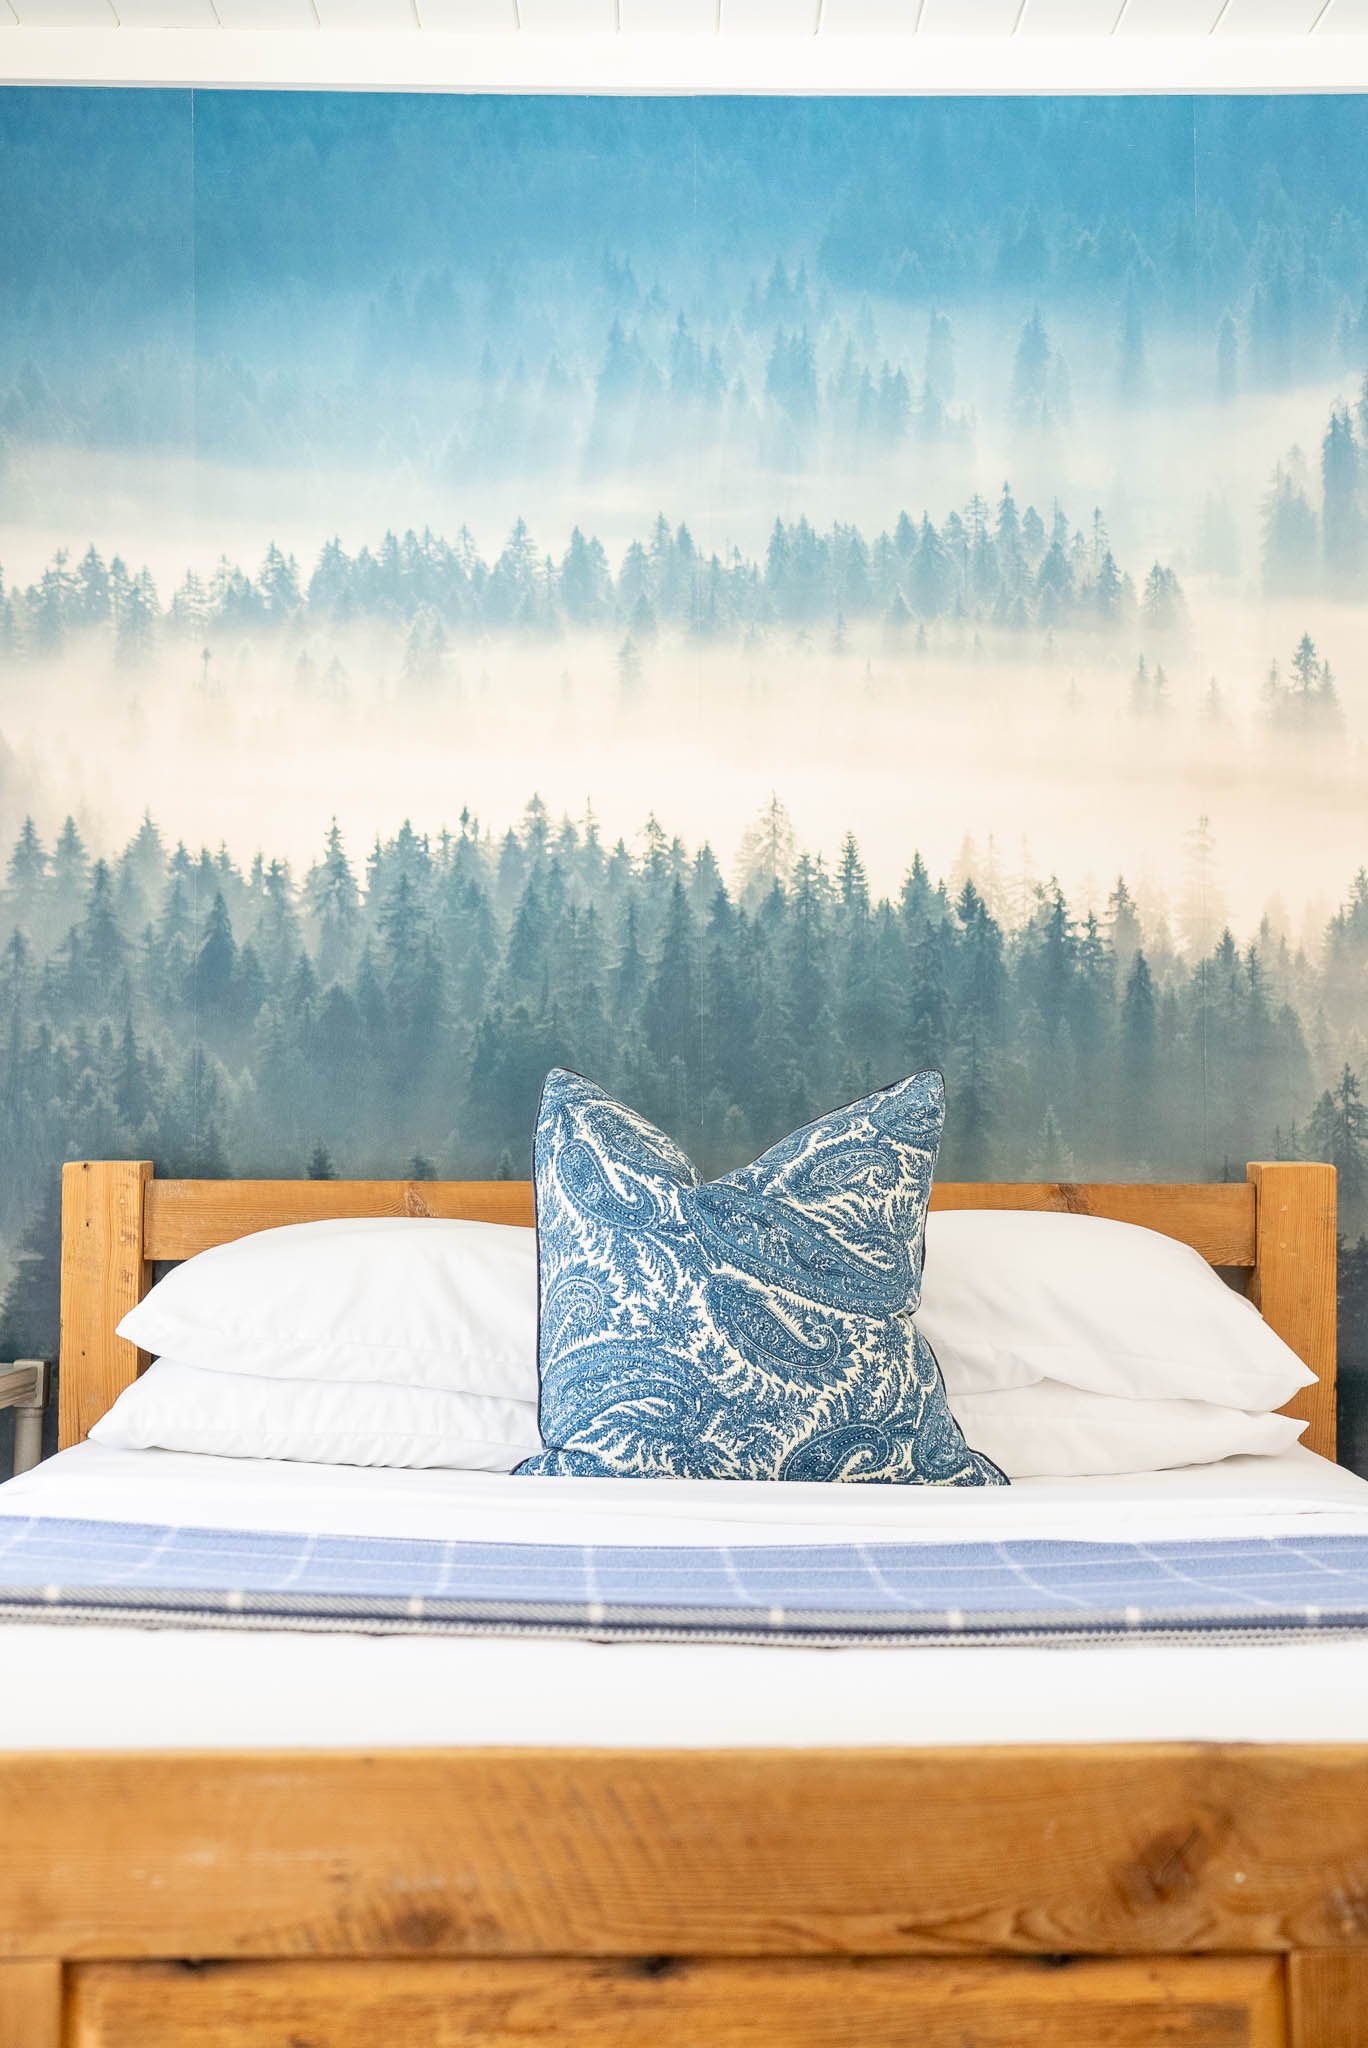 Today we're showing some love for our beautiful first floor suite, Blue Spruce. Here's a little more on what you'll experience with a stay in this cozy room.
ㅤ
A first-floor suite, Blue Spruce comfortably accommodates two guests, offering a queen bed